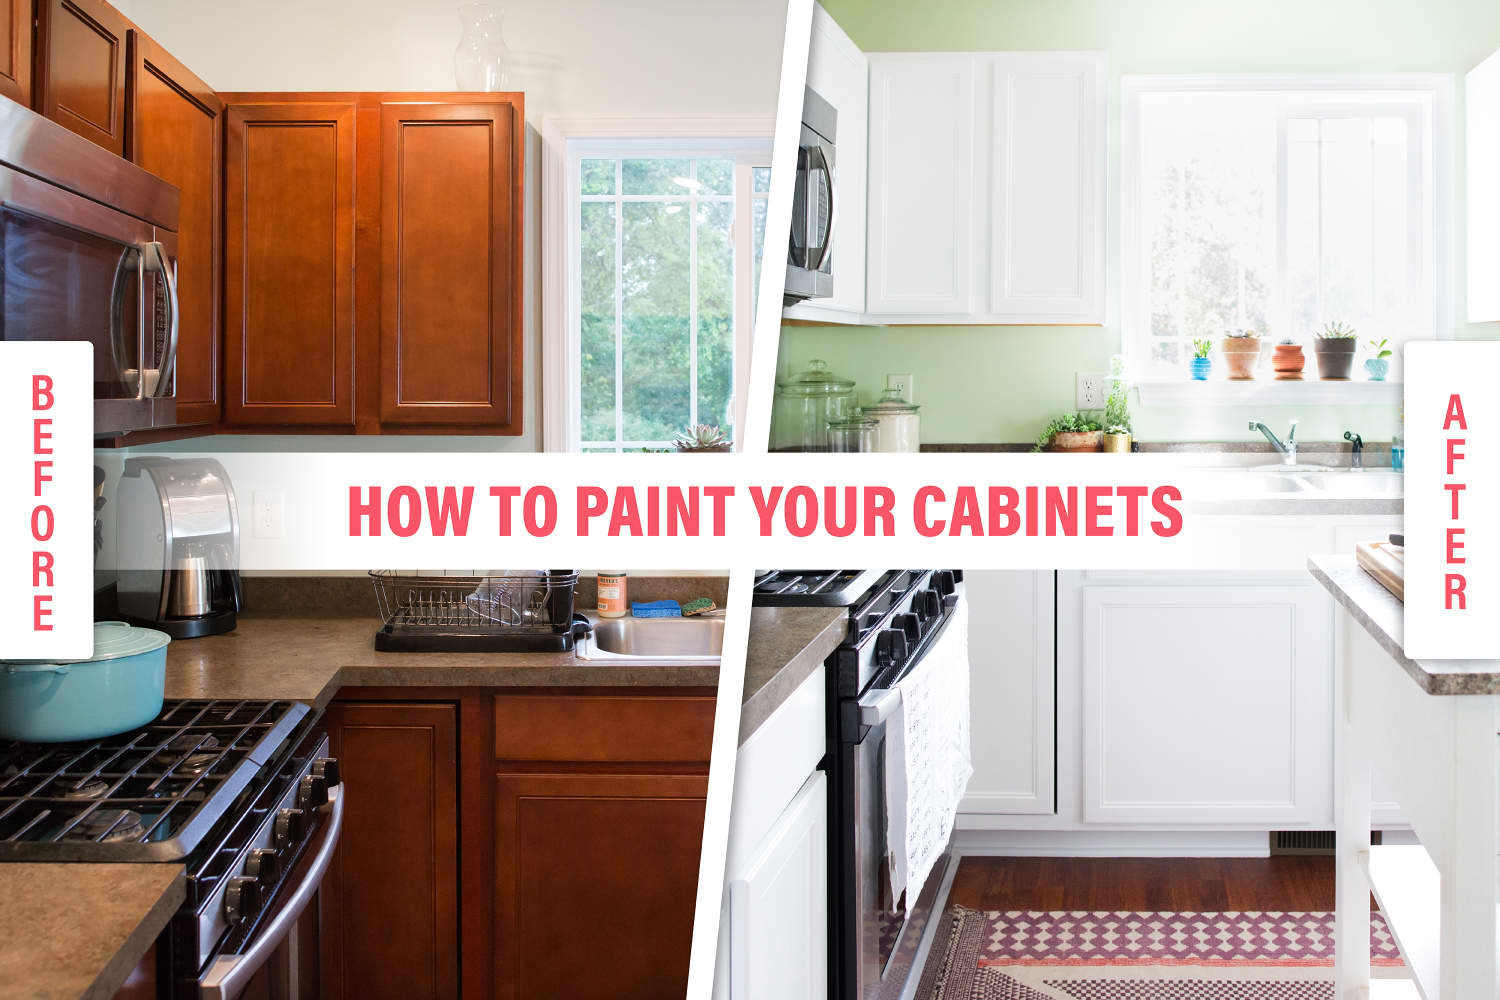 Repainting Kitchen Cabinets White
 How To Paint Wood Kitchen Cabinets with White Paint